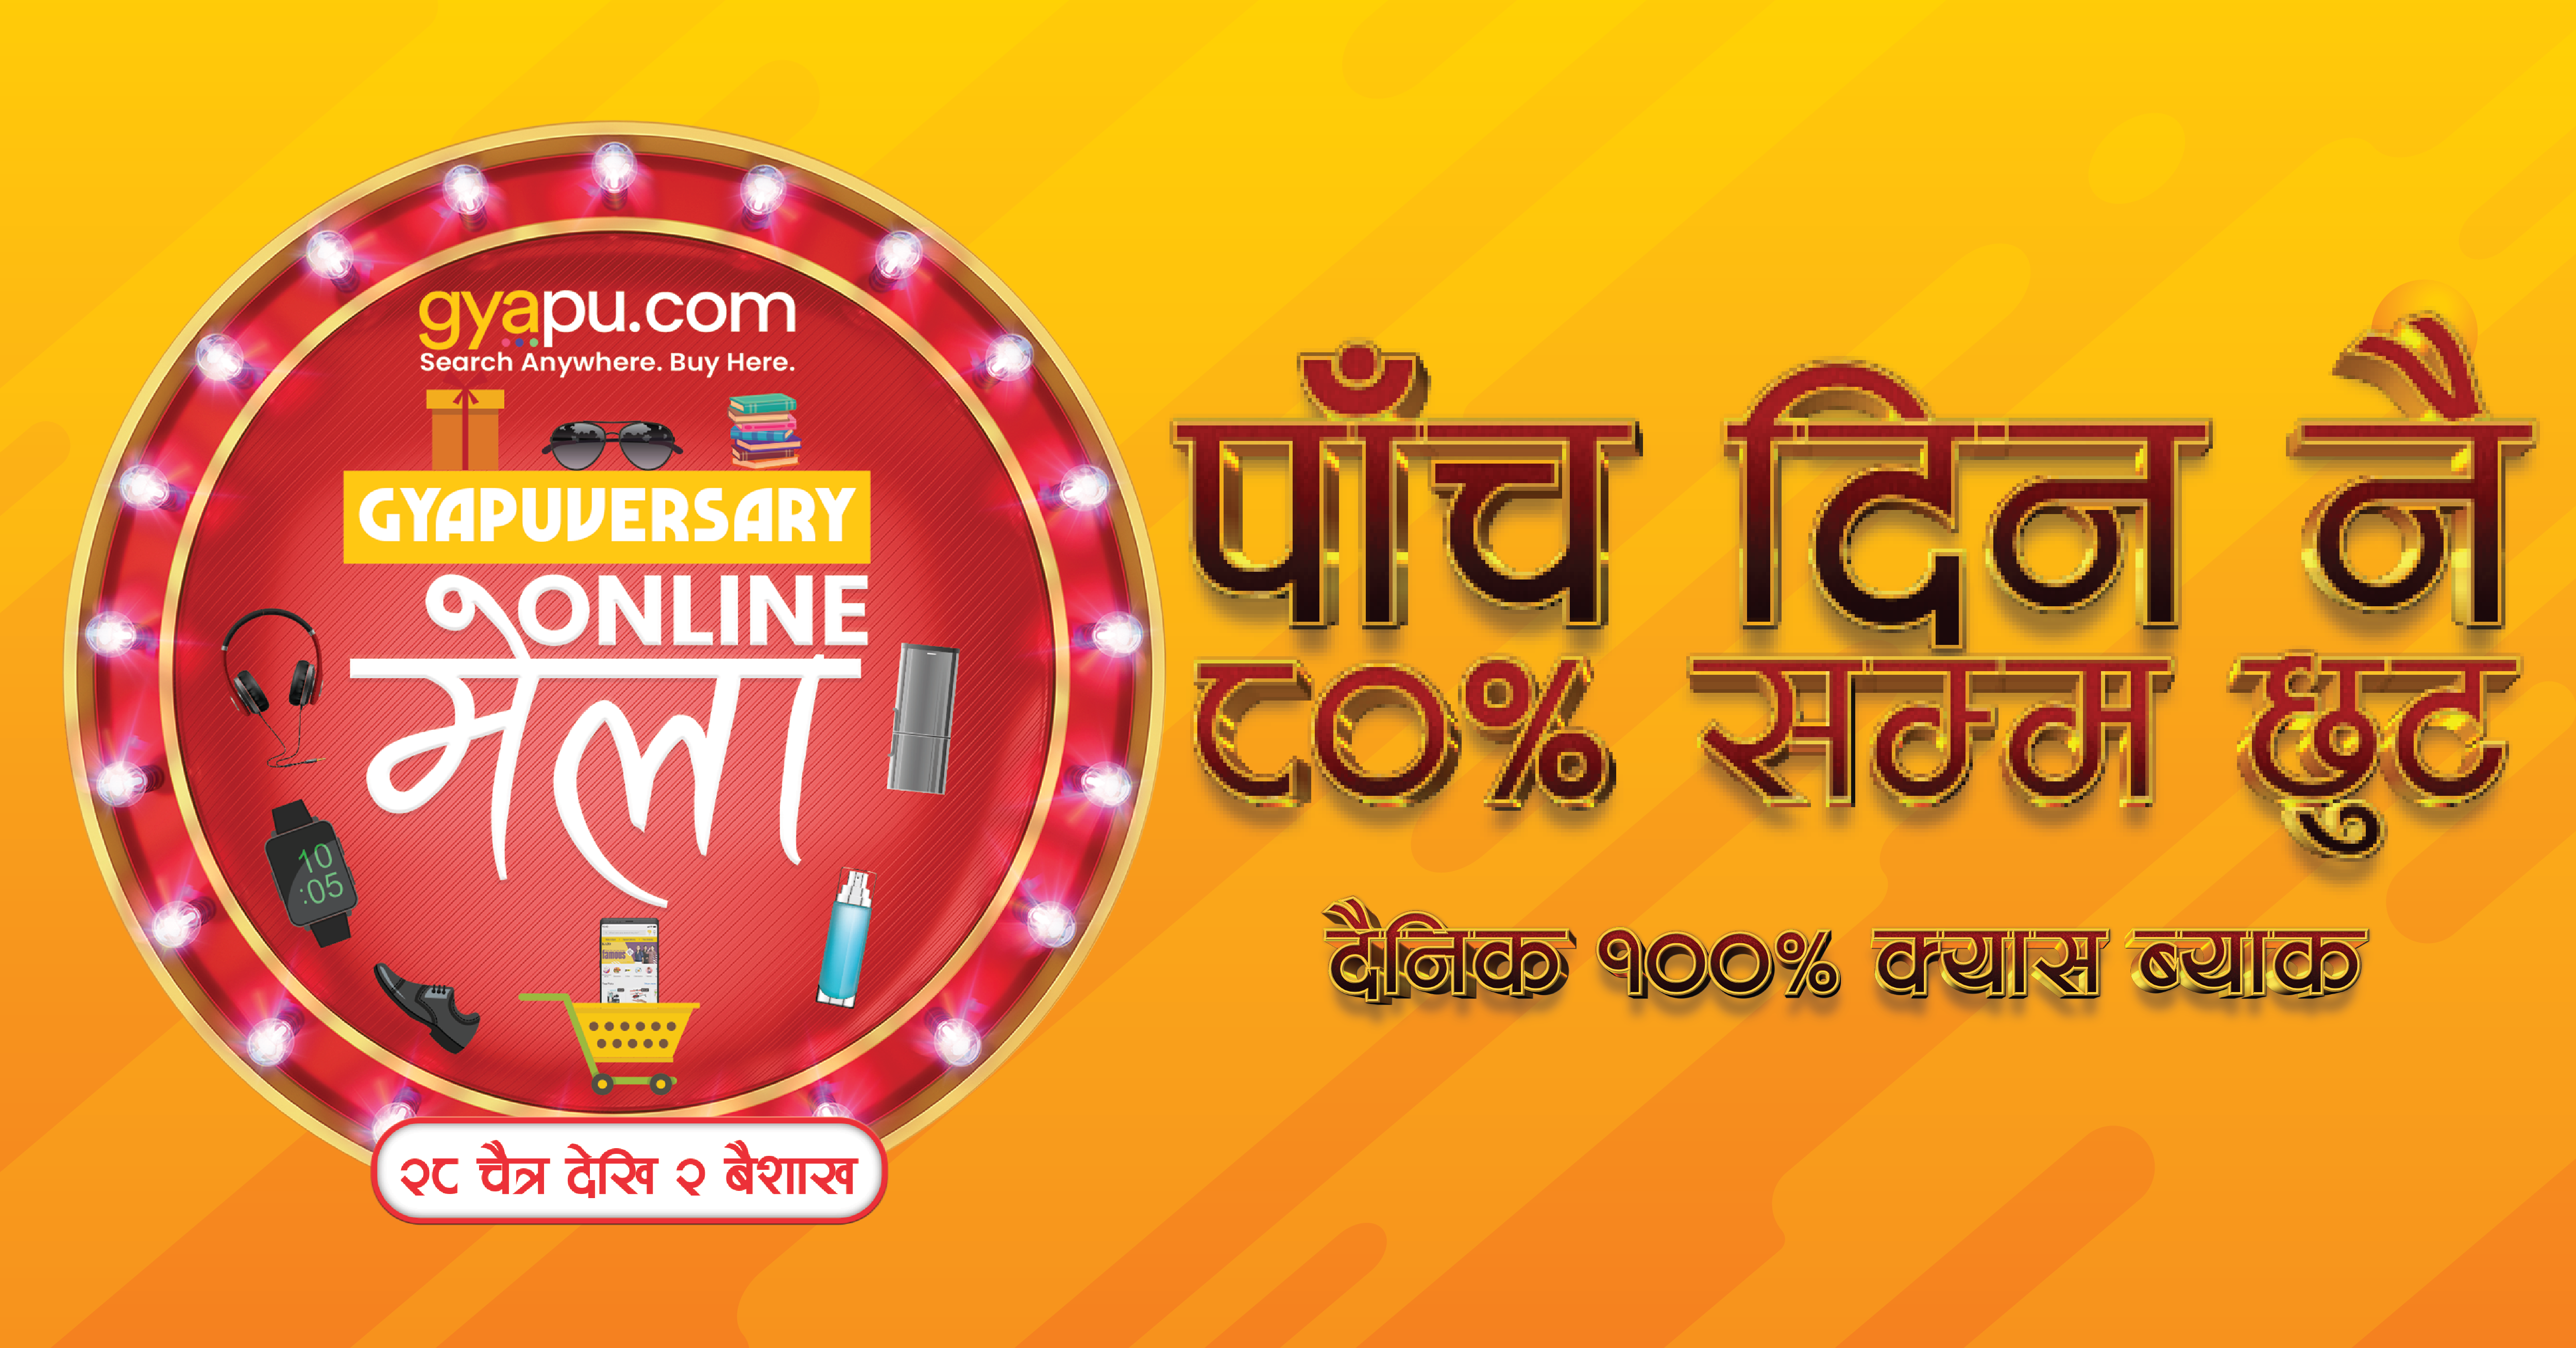 Gyapu Offer: 80% discount on the occasion of Gyapuversary